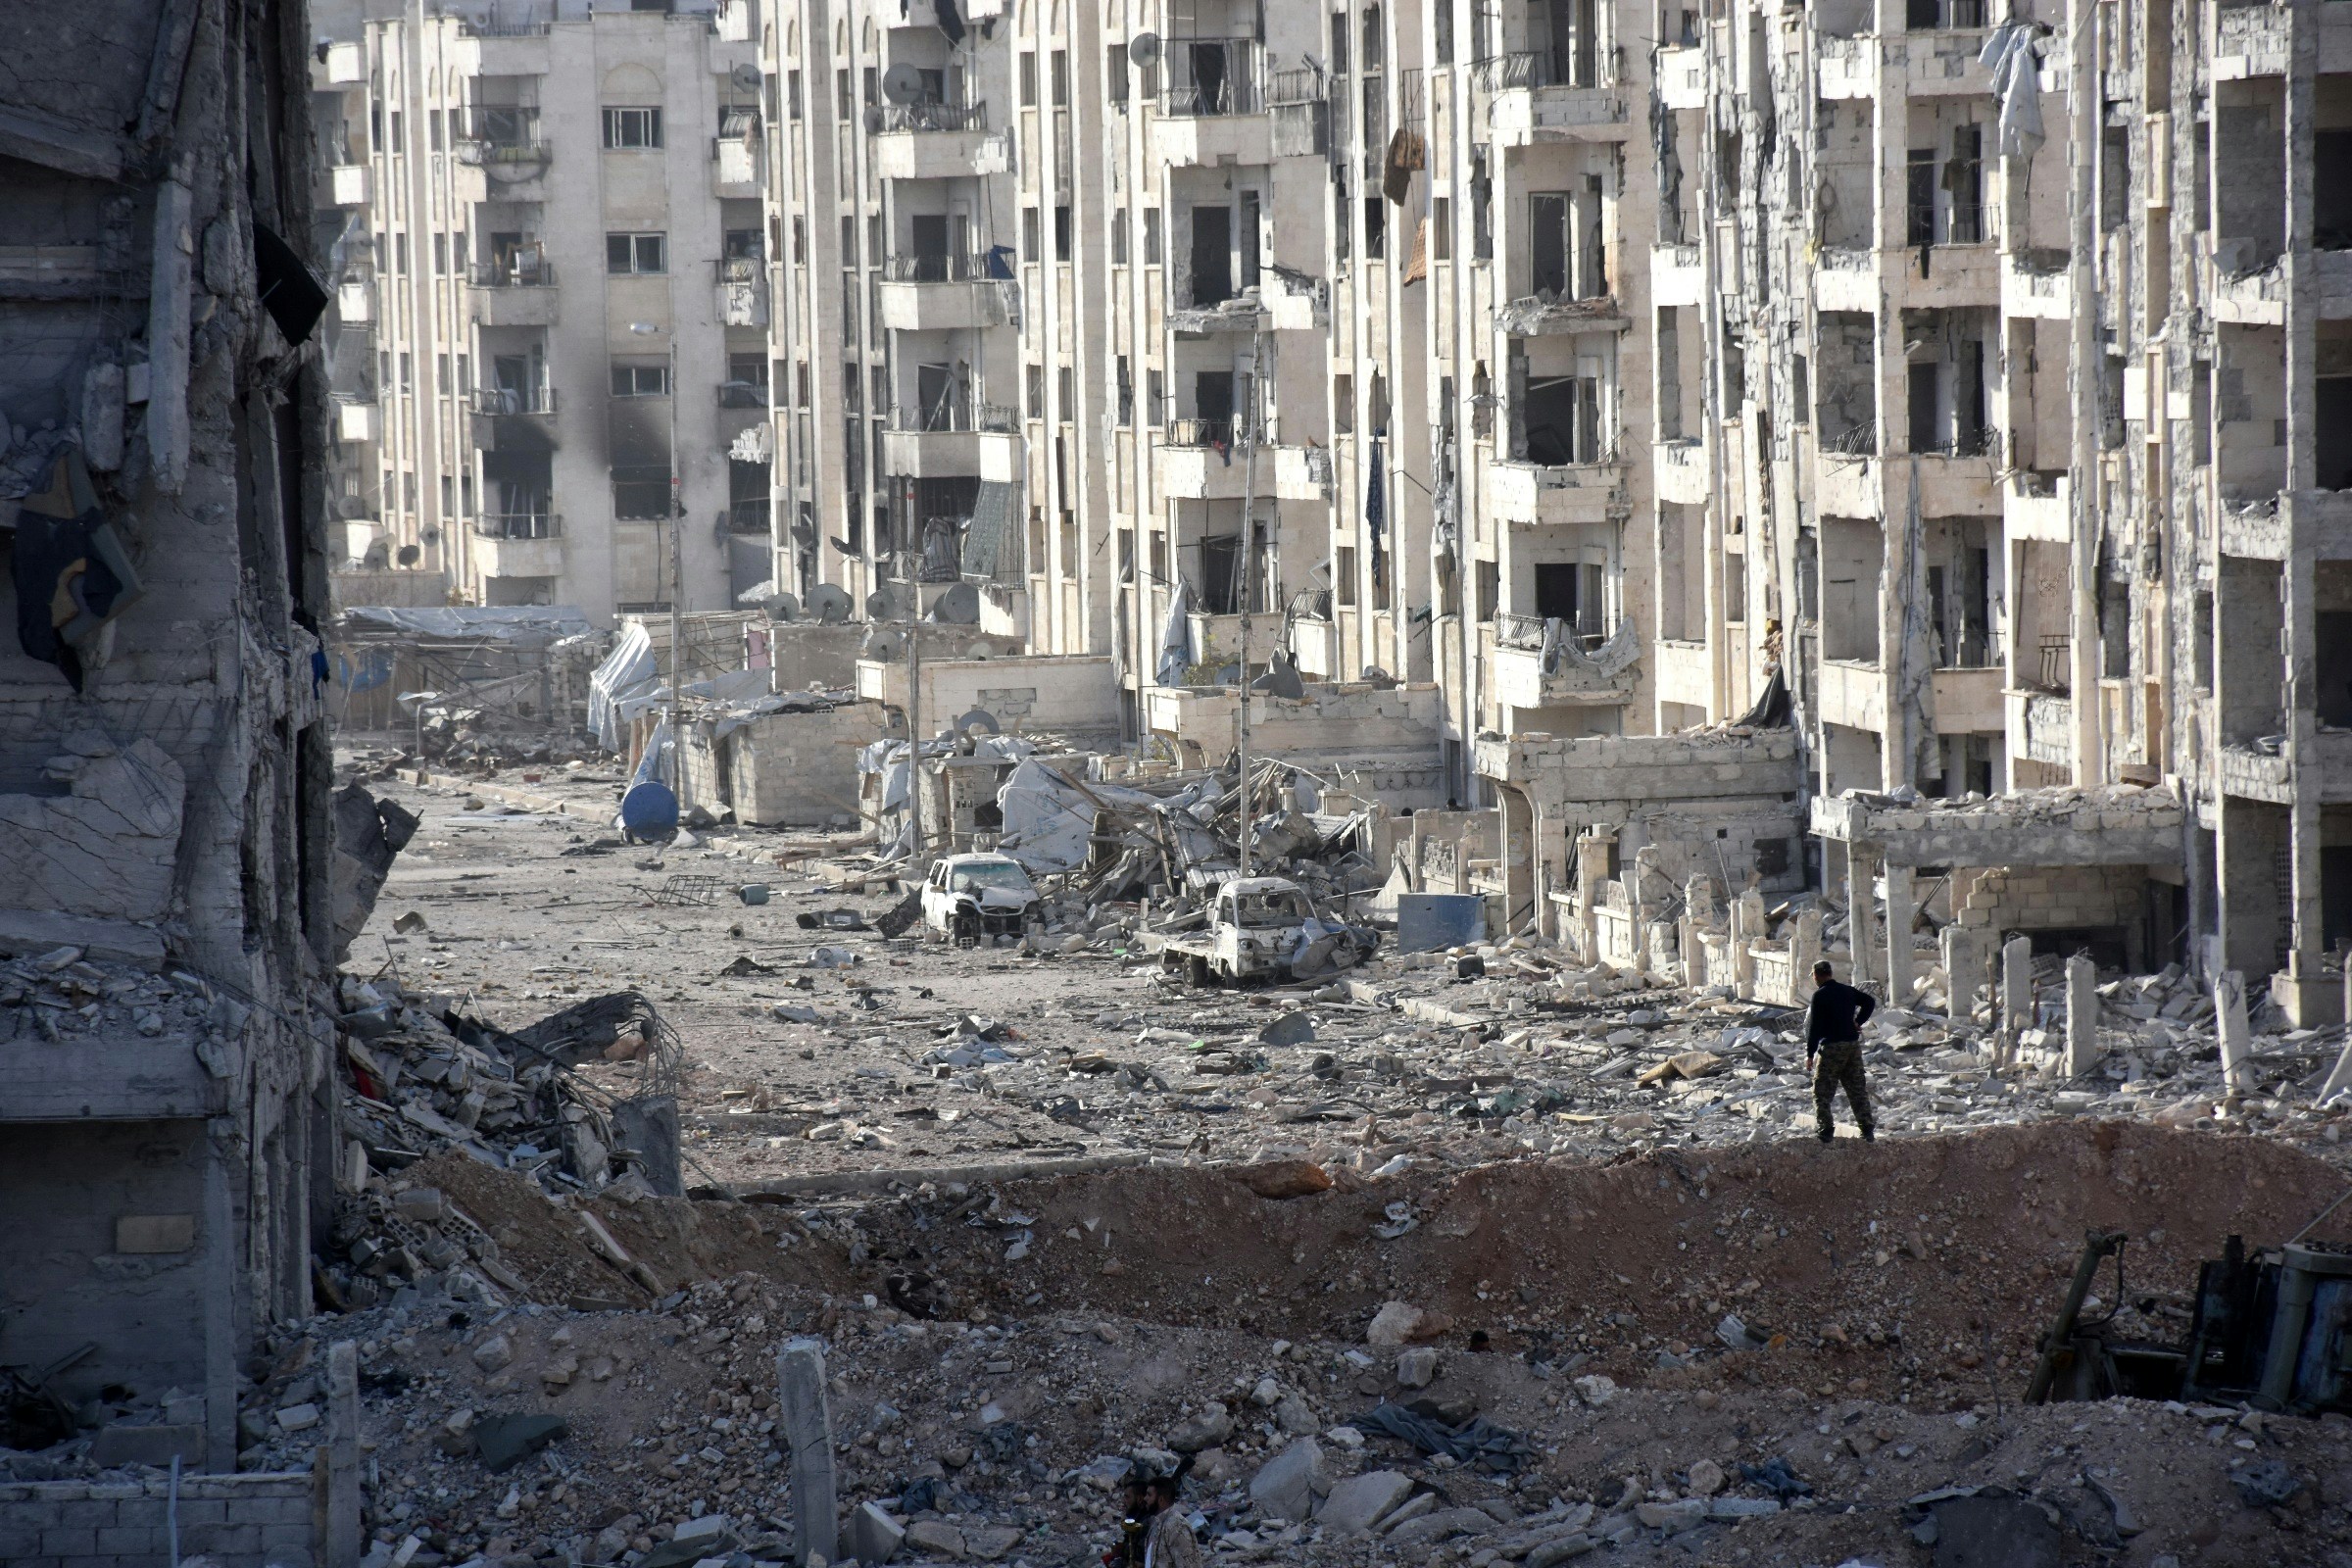 TOPSHOT - A member of the Syrian pro-government forces stands amid heavily damaged buildings in Aleppo's 1070 district on November 8, 2016, after troops seized it from rebel fighters. Syrian state media said government forces had advanced southwest of divided second city Aleppo, seizing the 1070 district from rebel forces. The Syrian Observatory for Human Rights monitor also reported the advance, saying it would allow government forces to protect areas already under their control on the southern outskirts of Aleppo.  / AFP / GEORGES OURFALIAN        (Photo credit should read GEORGES OURFALIAN/AFP/Getty Images)